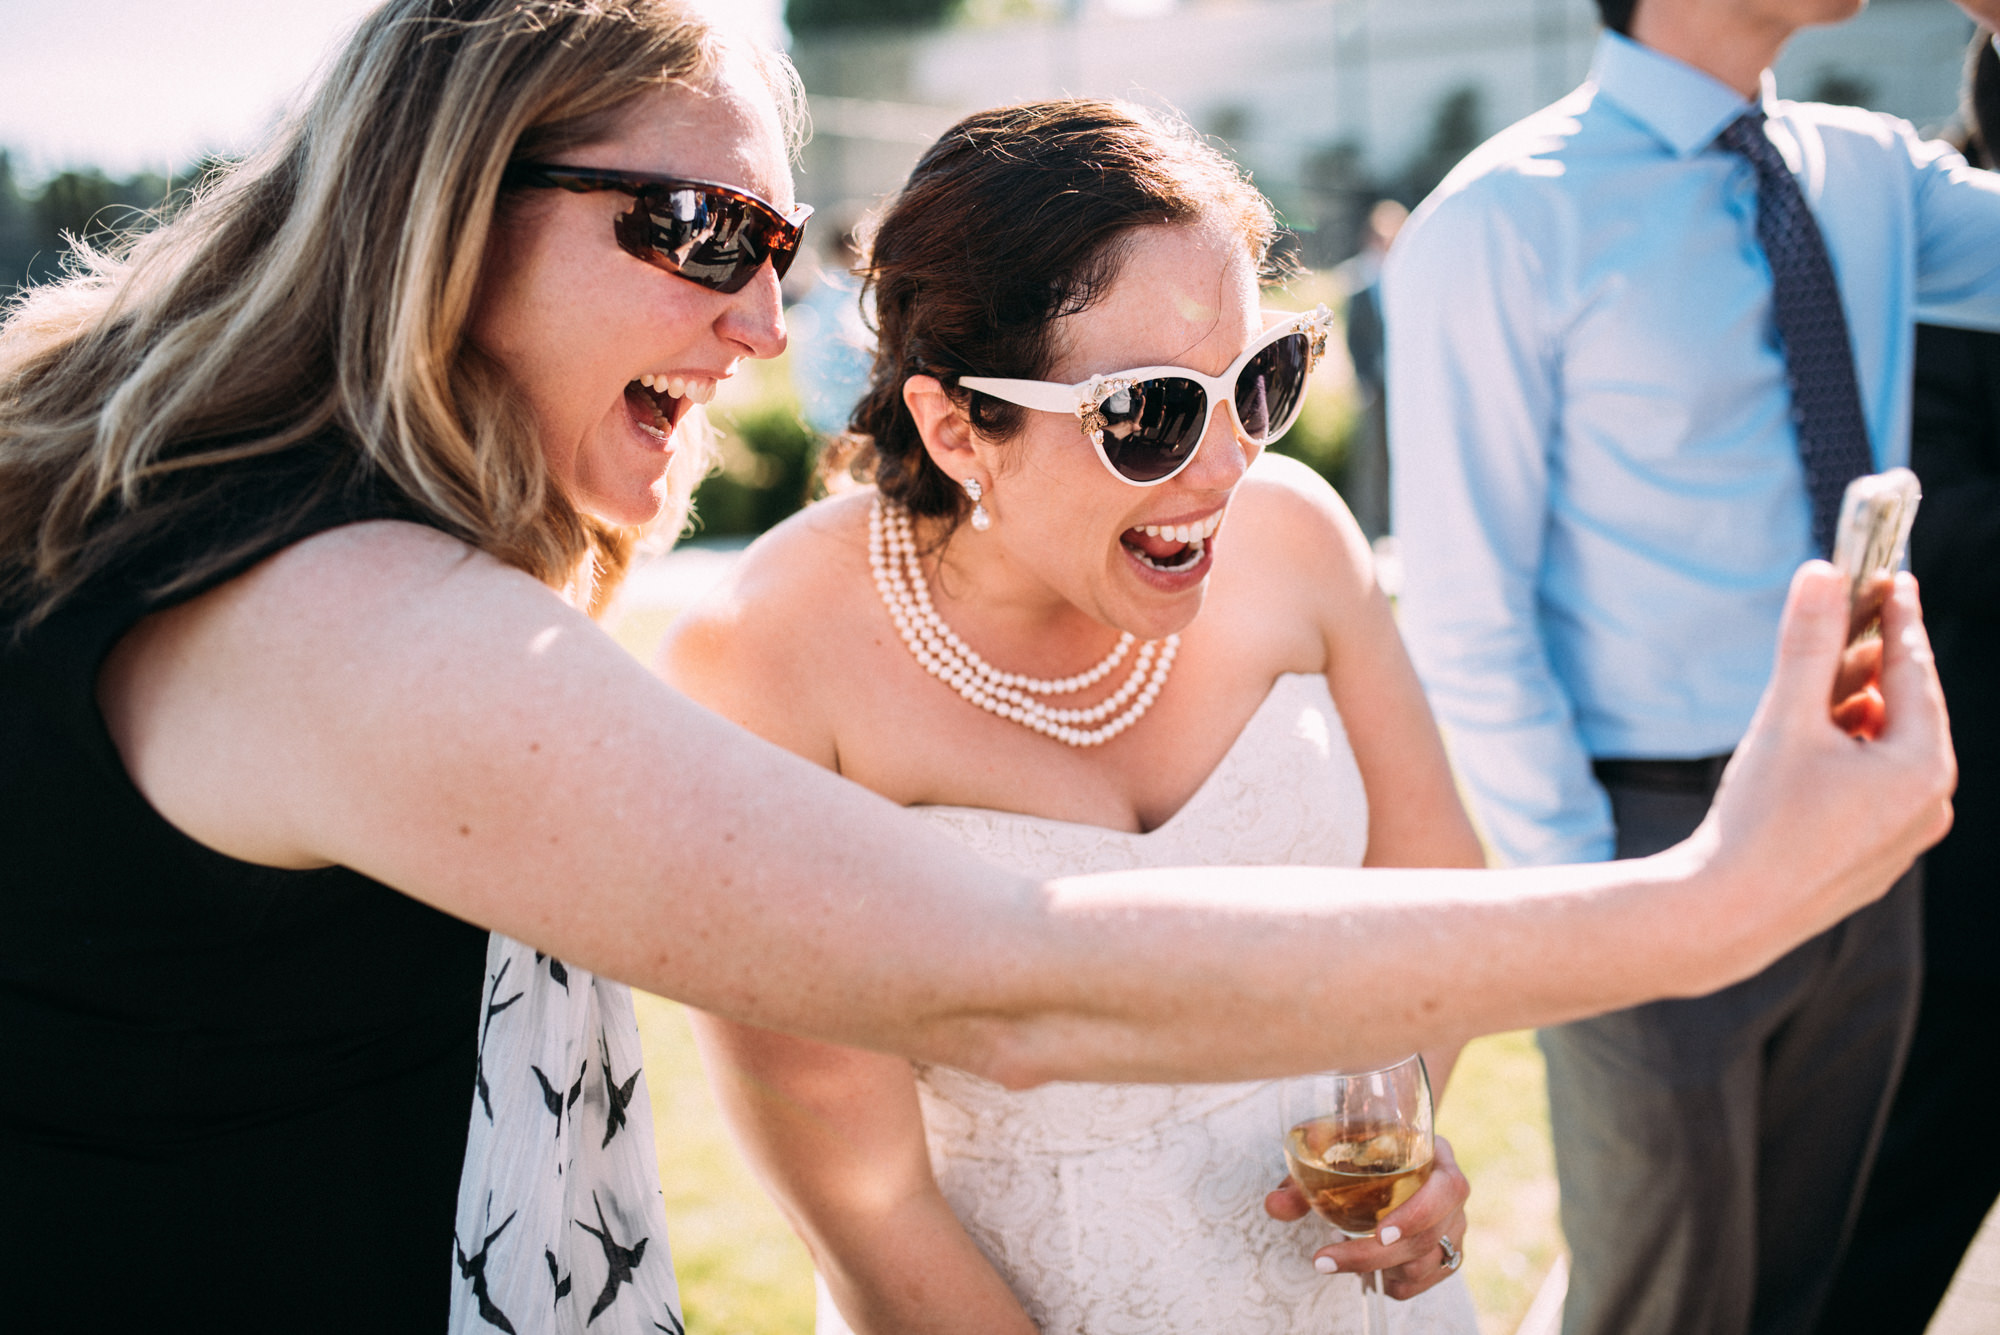 A guest facetimes with a friend and the bride at Joelle and Ryan's wedding cocktail reception at the Seattle Tennis Club. Summer 2016. Photo by Seattle Wedding Photographers Jennifer Tai Photo Artistry.